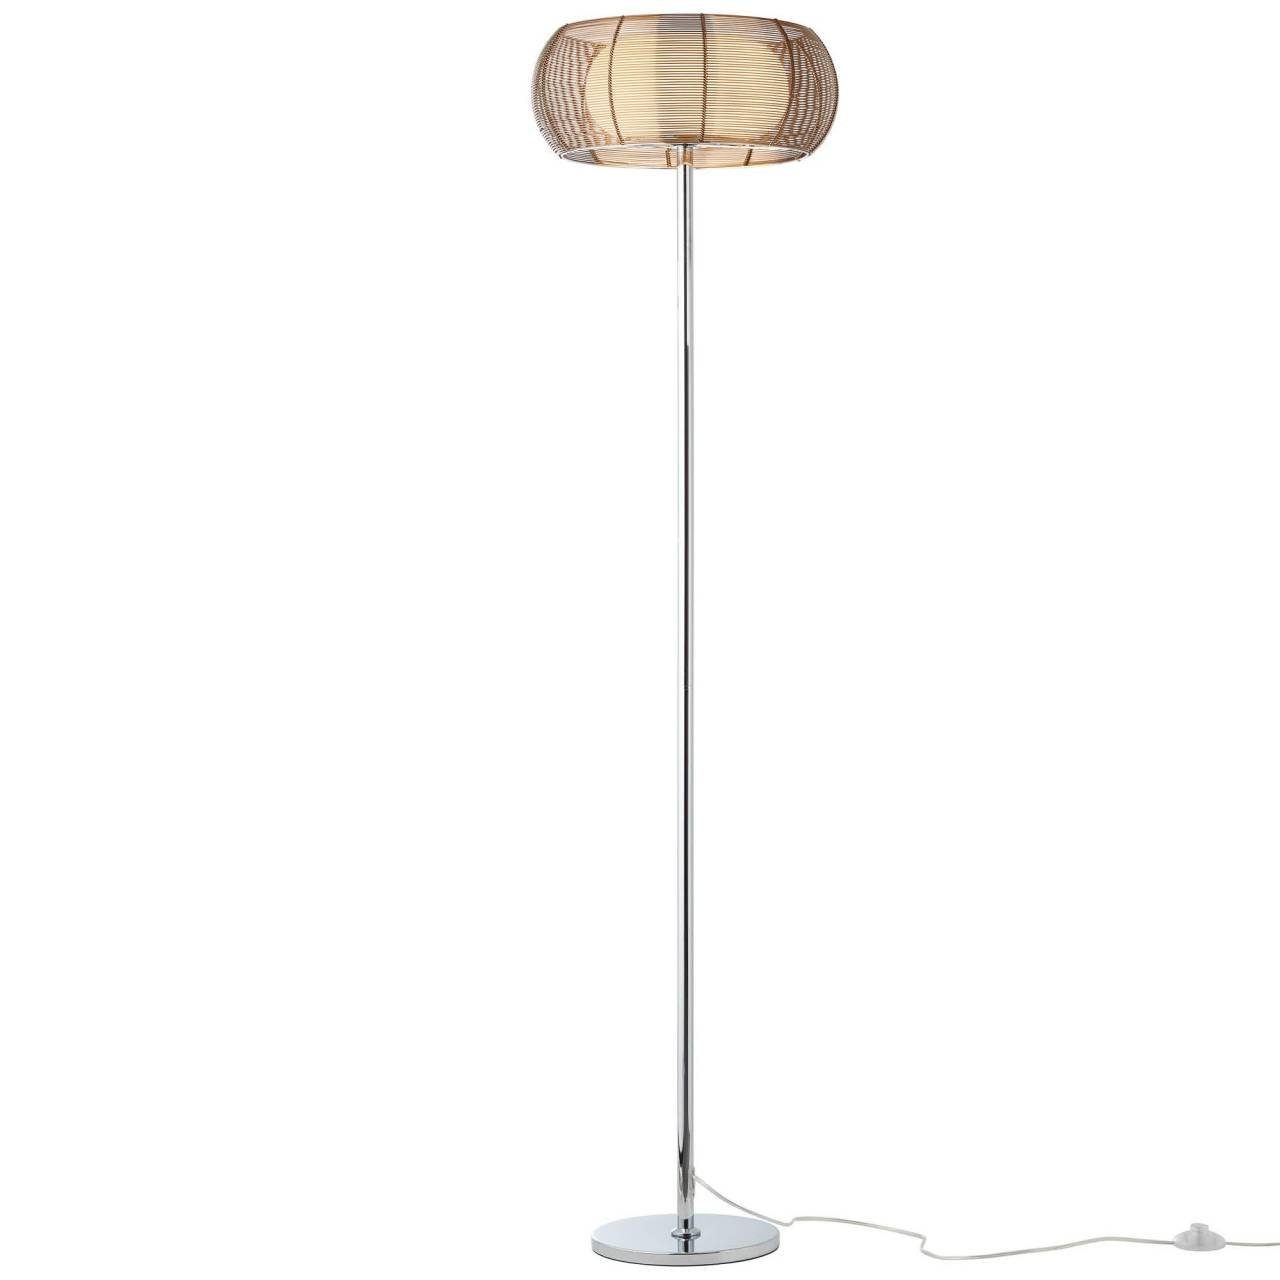 No Relax, 30W, bronze/chrom g.f. Stehlampe 2x Brilliant Relax A60, E27, Standleuchte Lampe 2flg